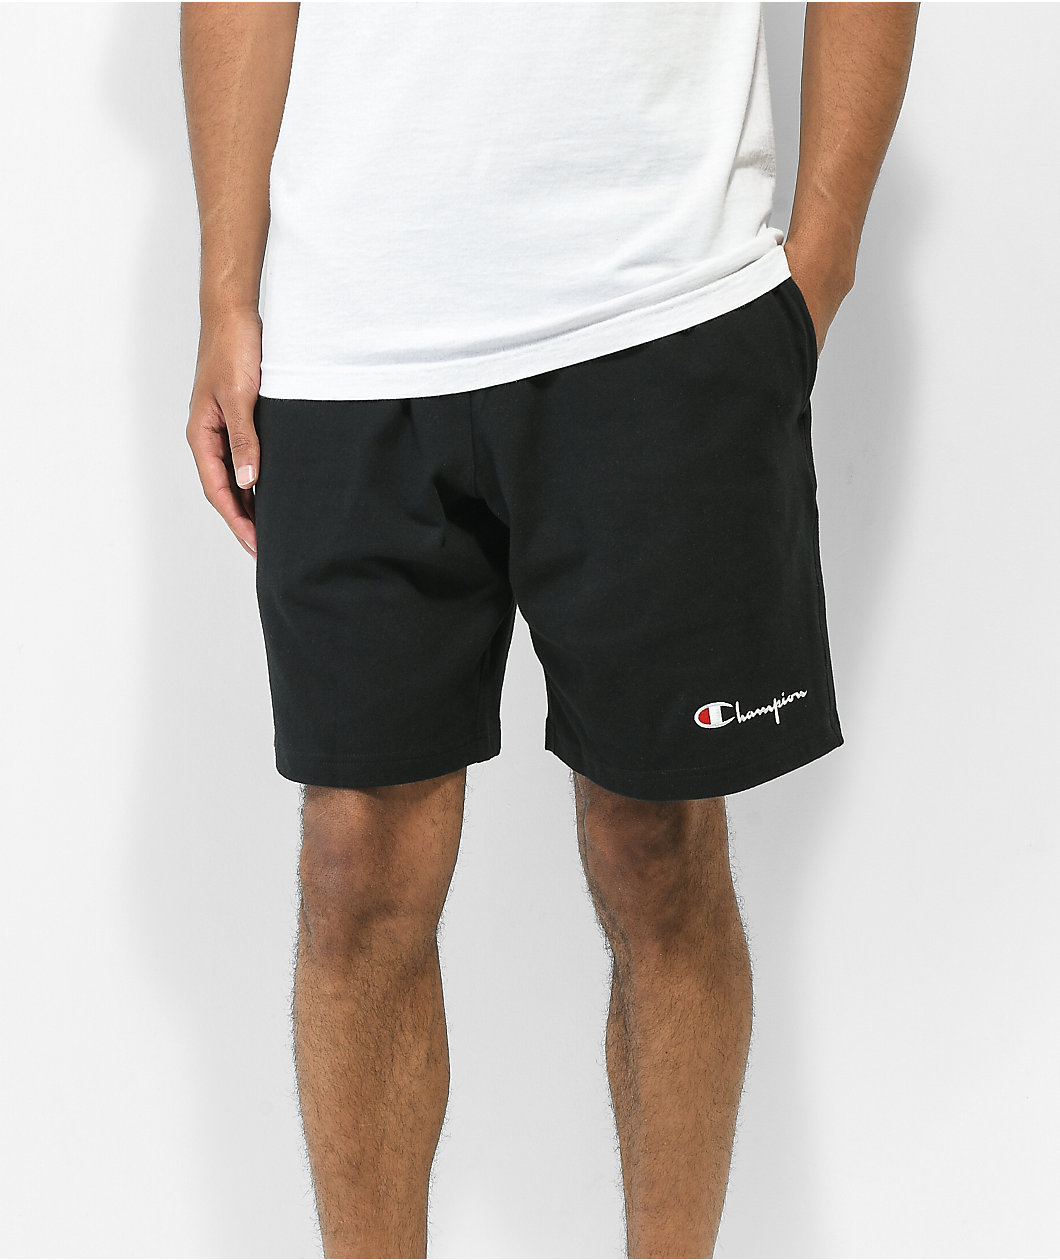 Order High Quality Champion Heavyweight Jersey Black Sweat Shorts items and free shipping for orders above